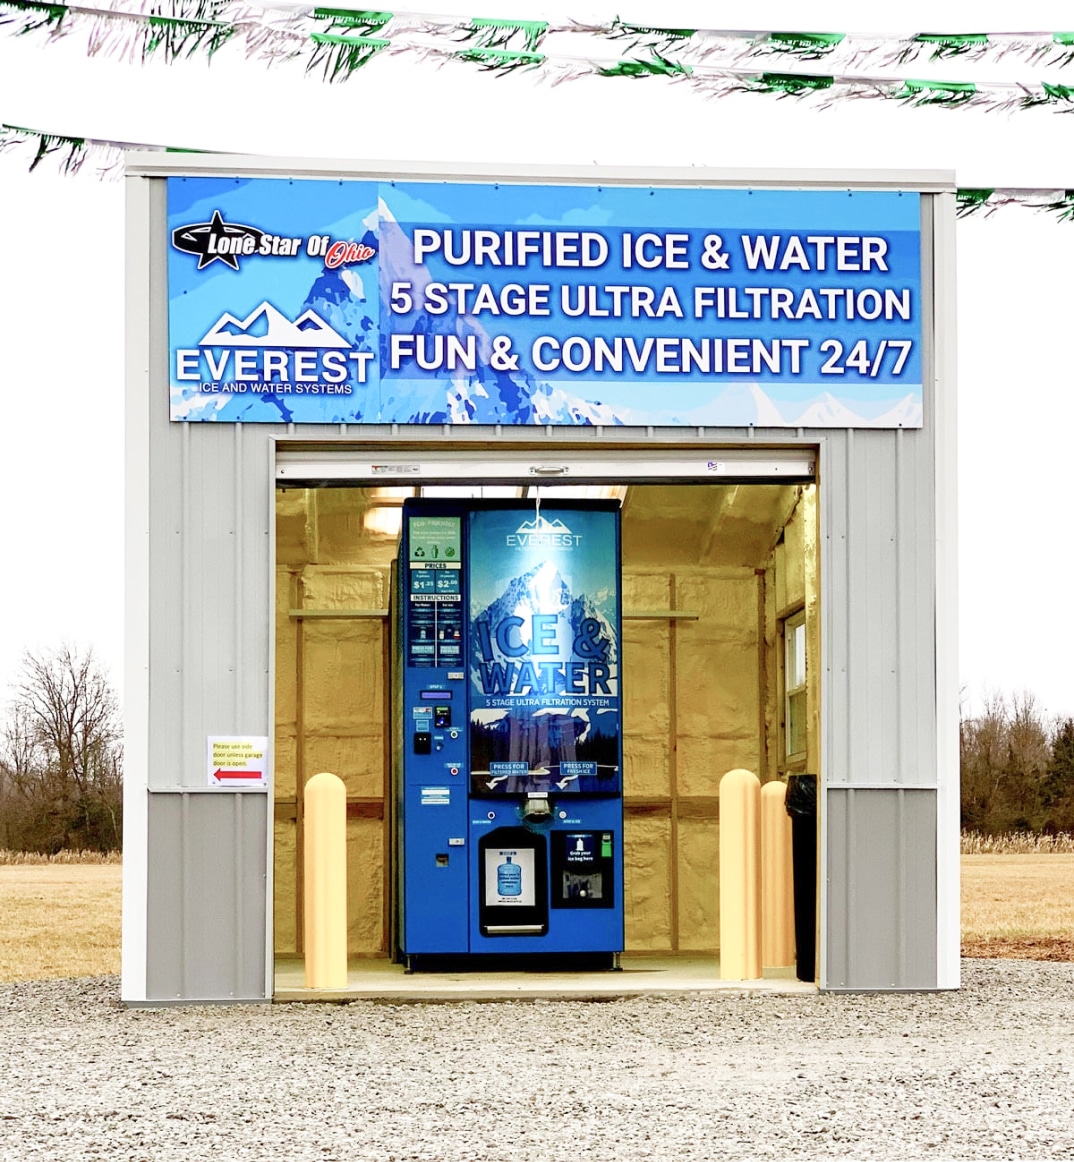 A portable storage building with Lone Star of Ohio branding on it where an Everest Ice and Water vending machine is housed